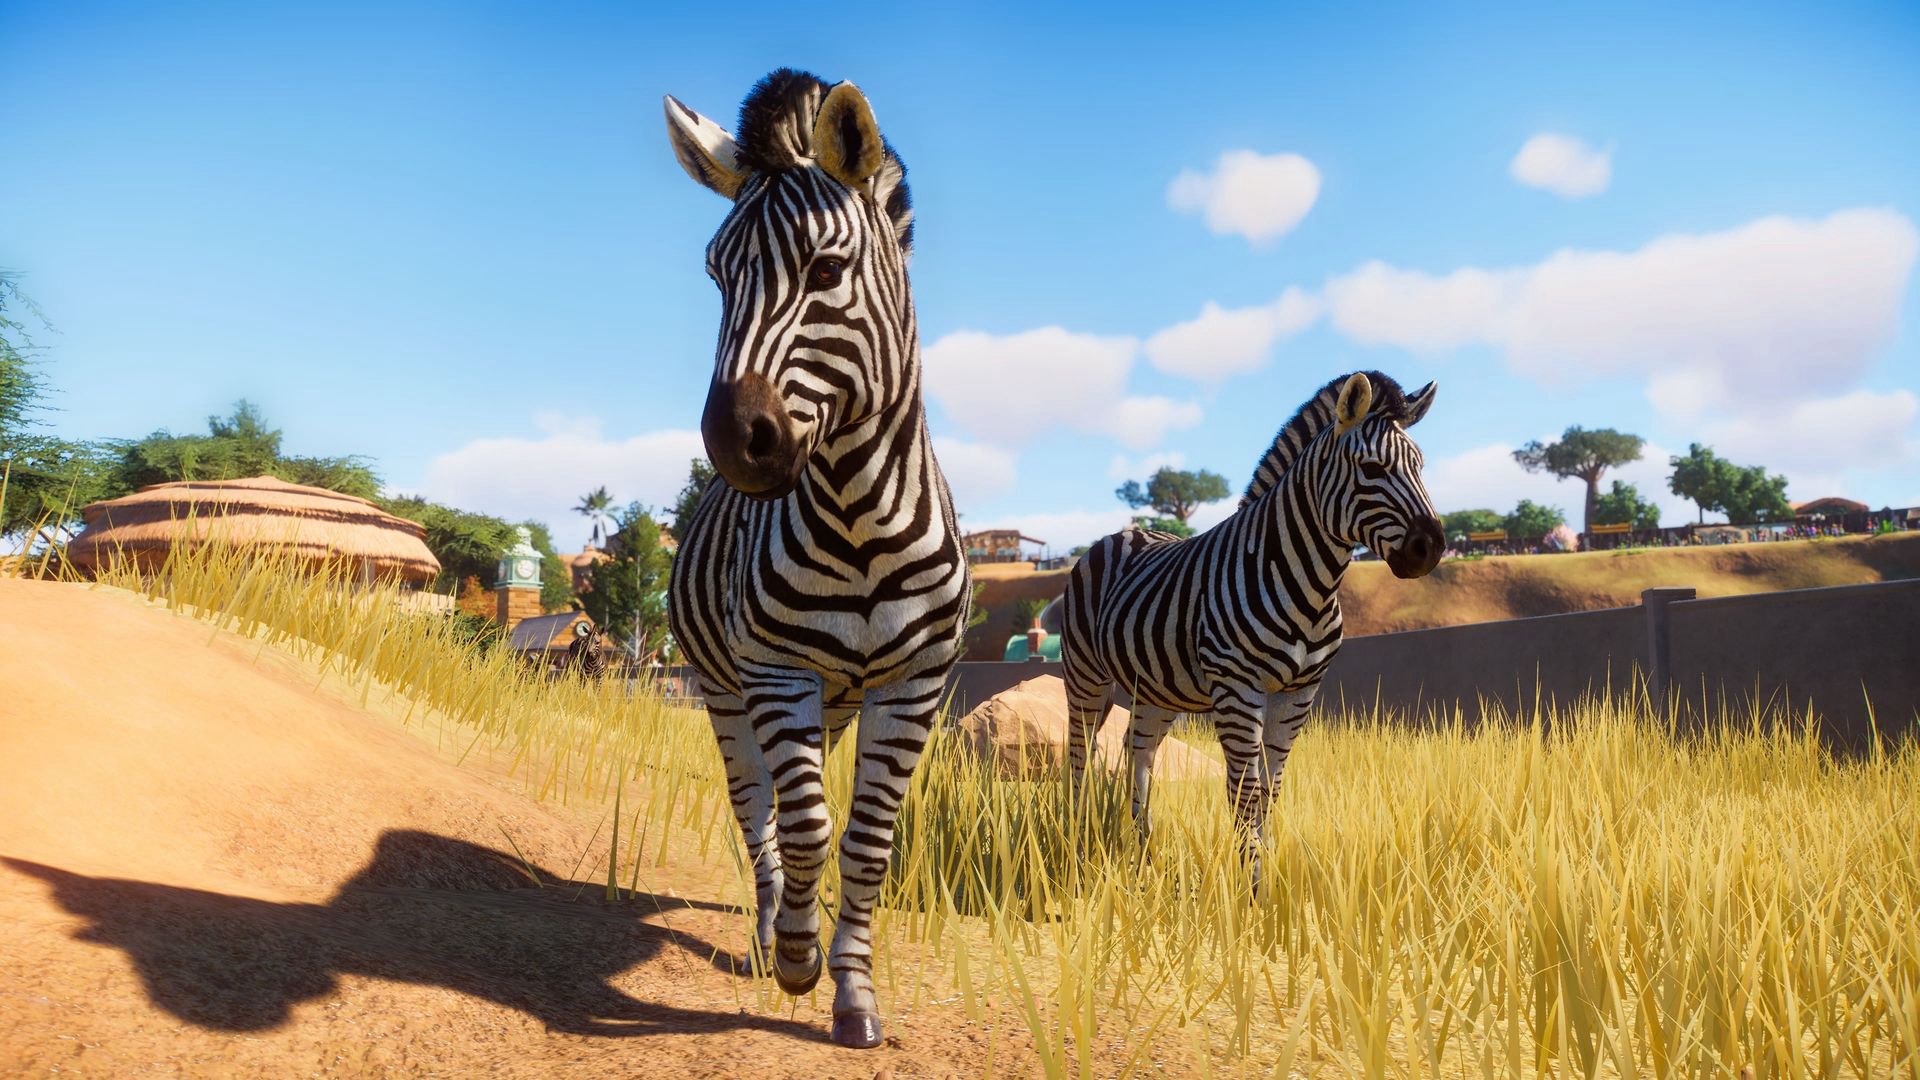 Planet Zoo Steam Account